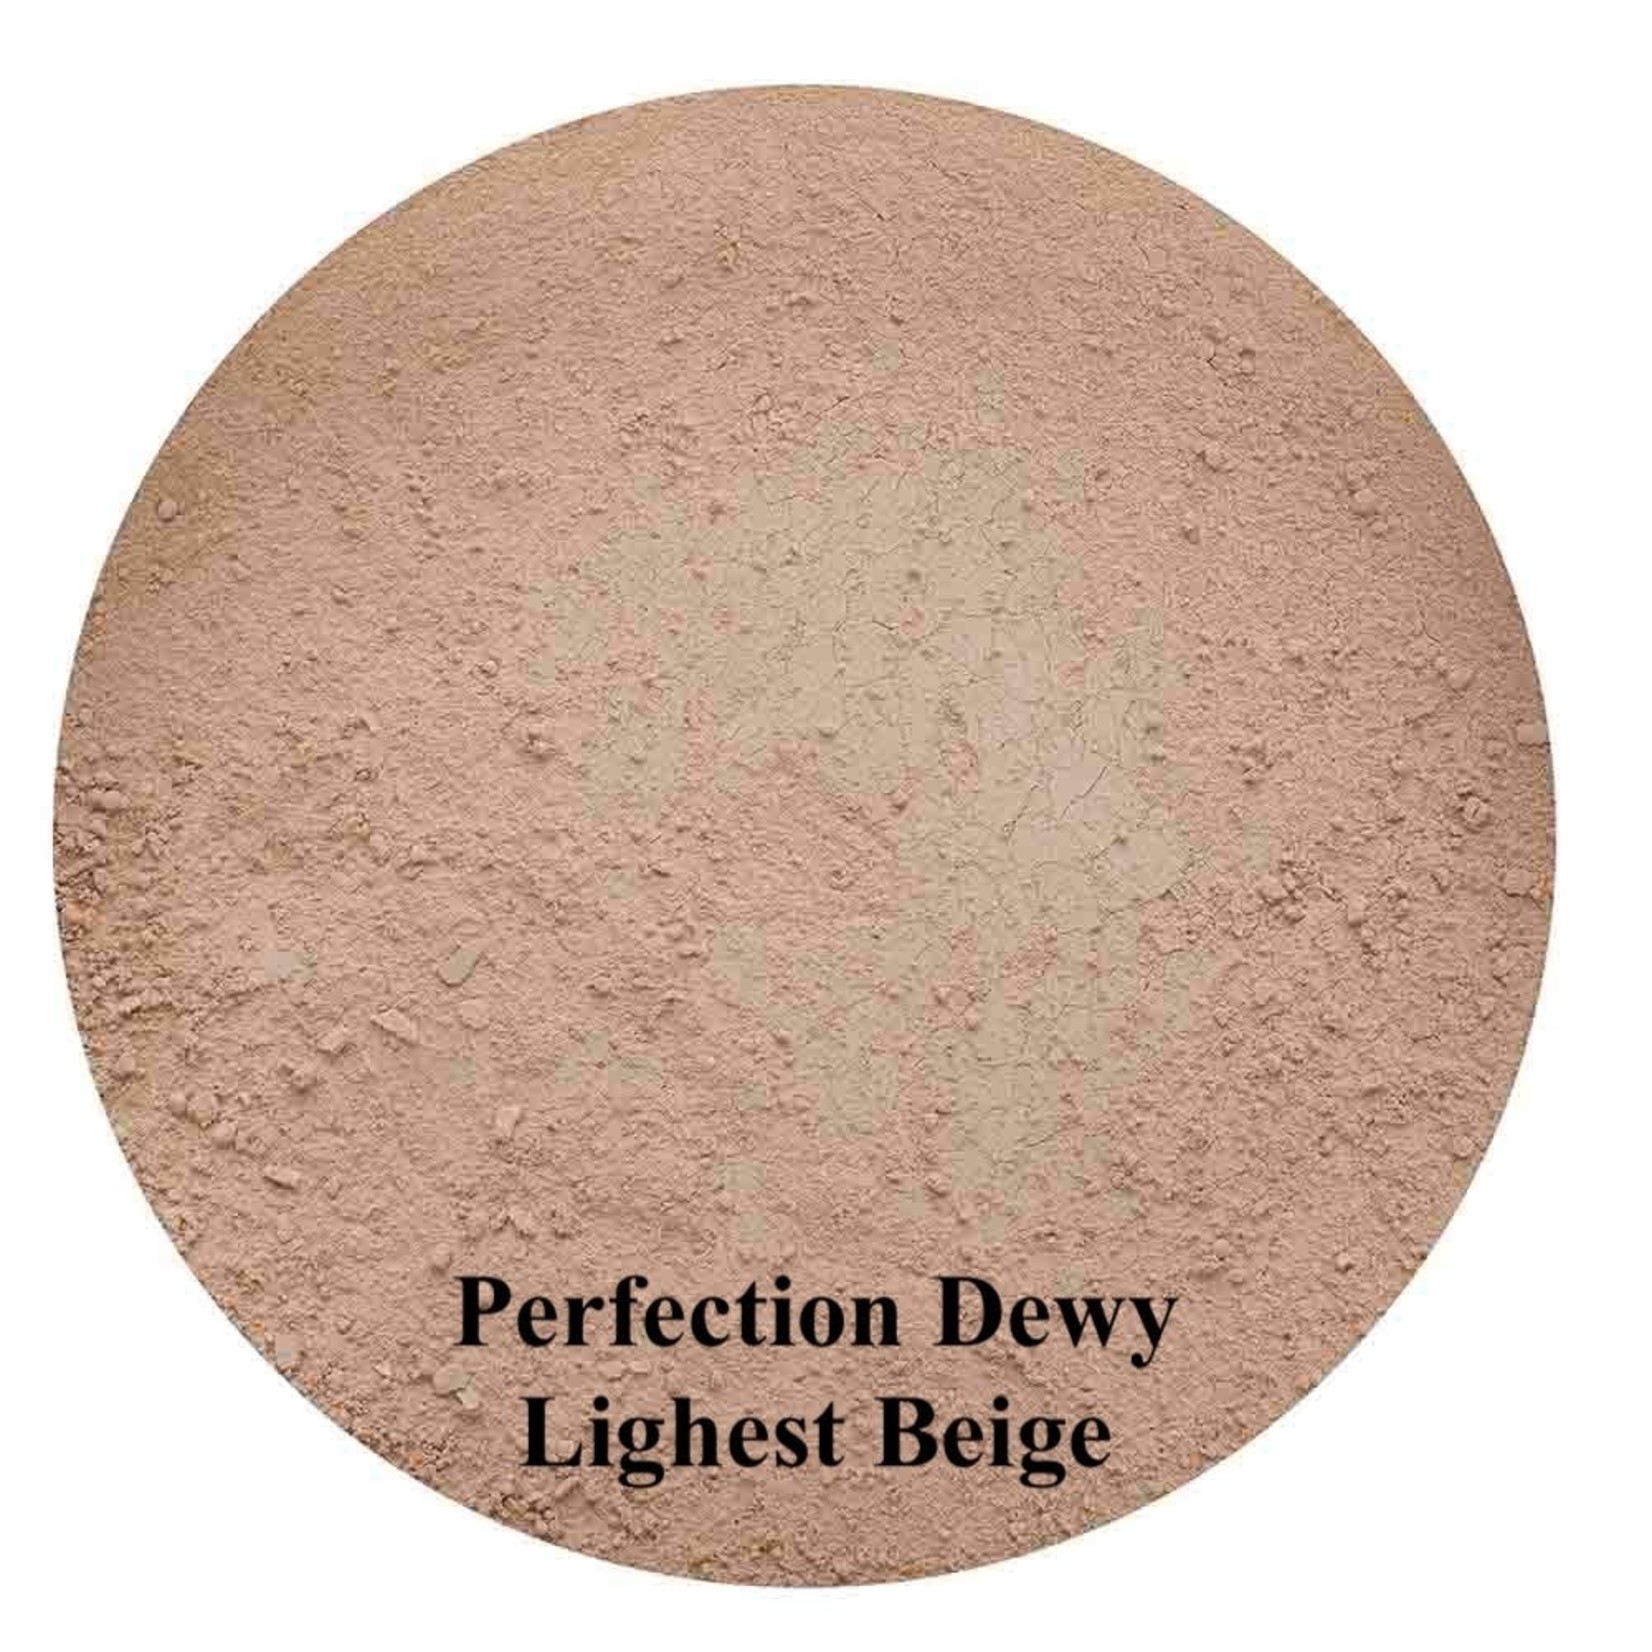 Eco Minerals Eco Minerals Perfection Dewy Foundation